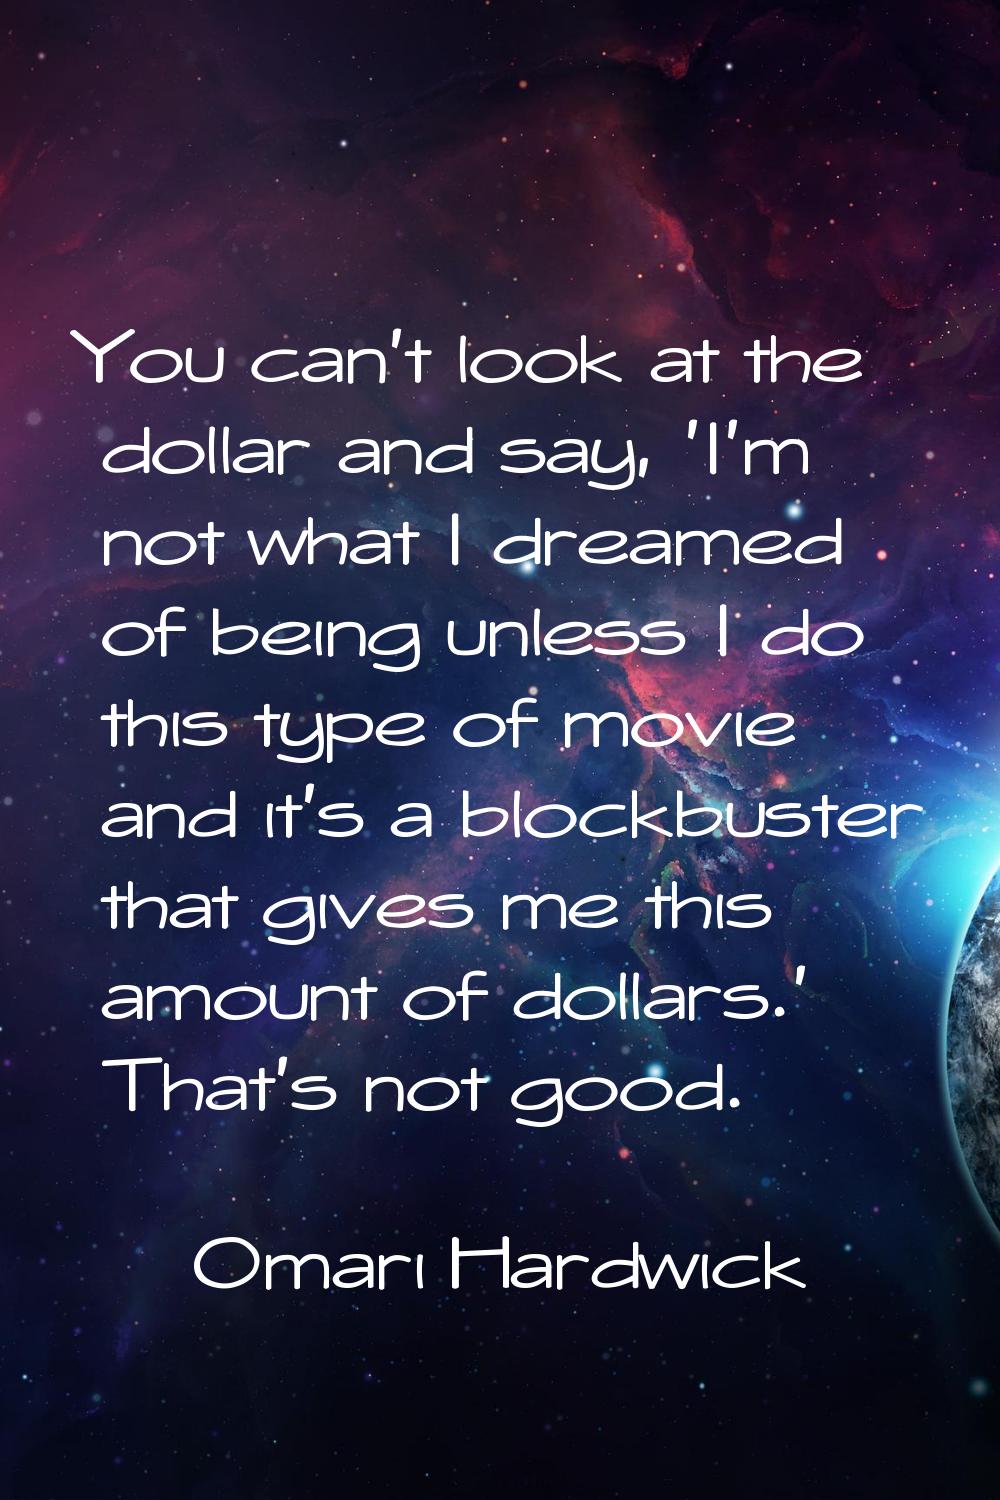 You can't look at the dollar and say, 'I'm not what I dreamed of being unless I do this type of mov